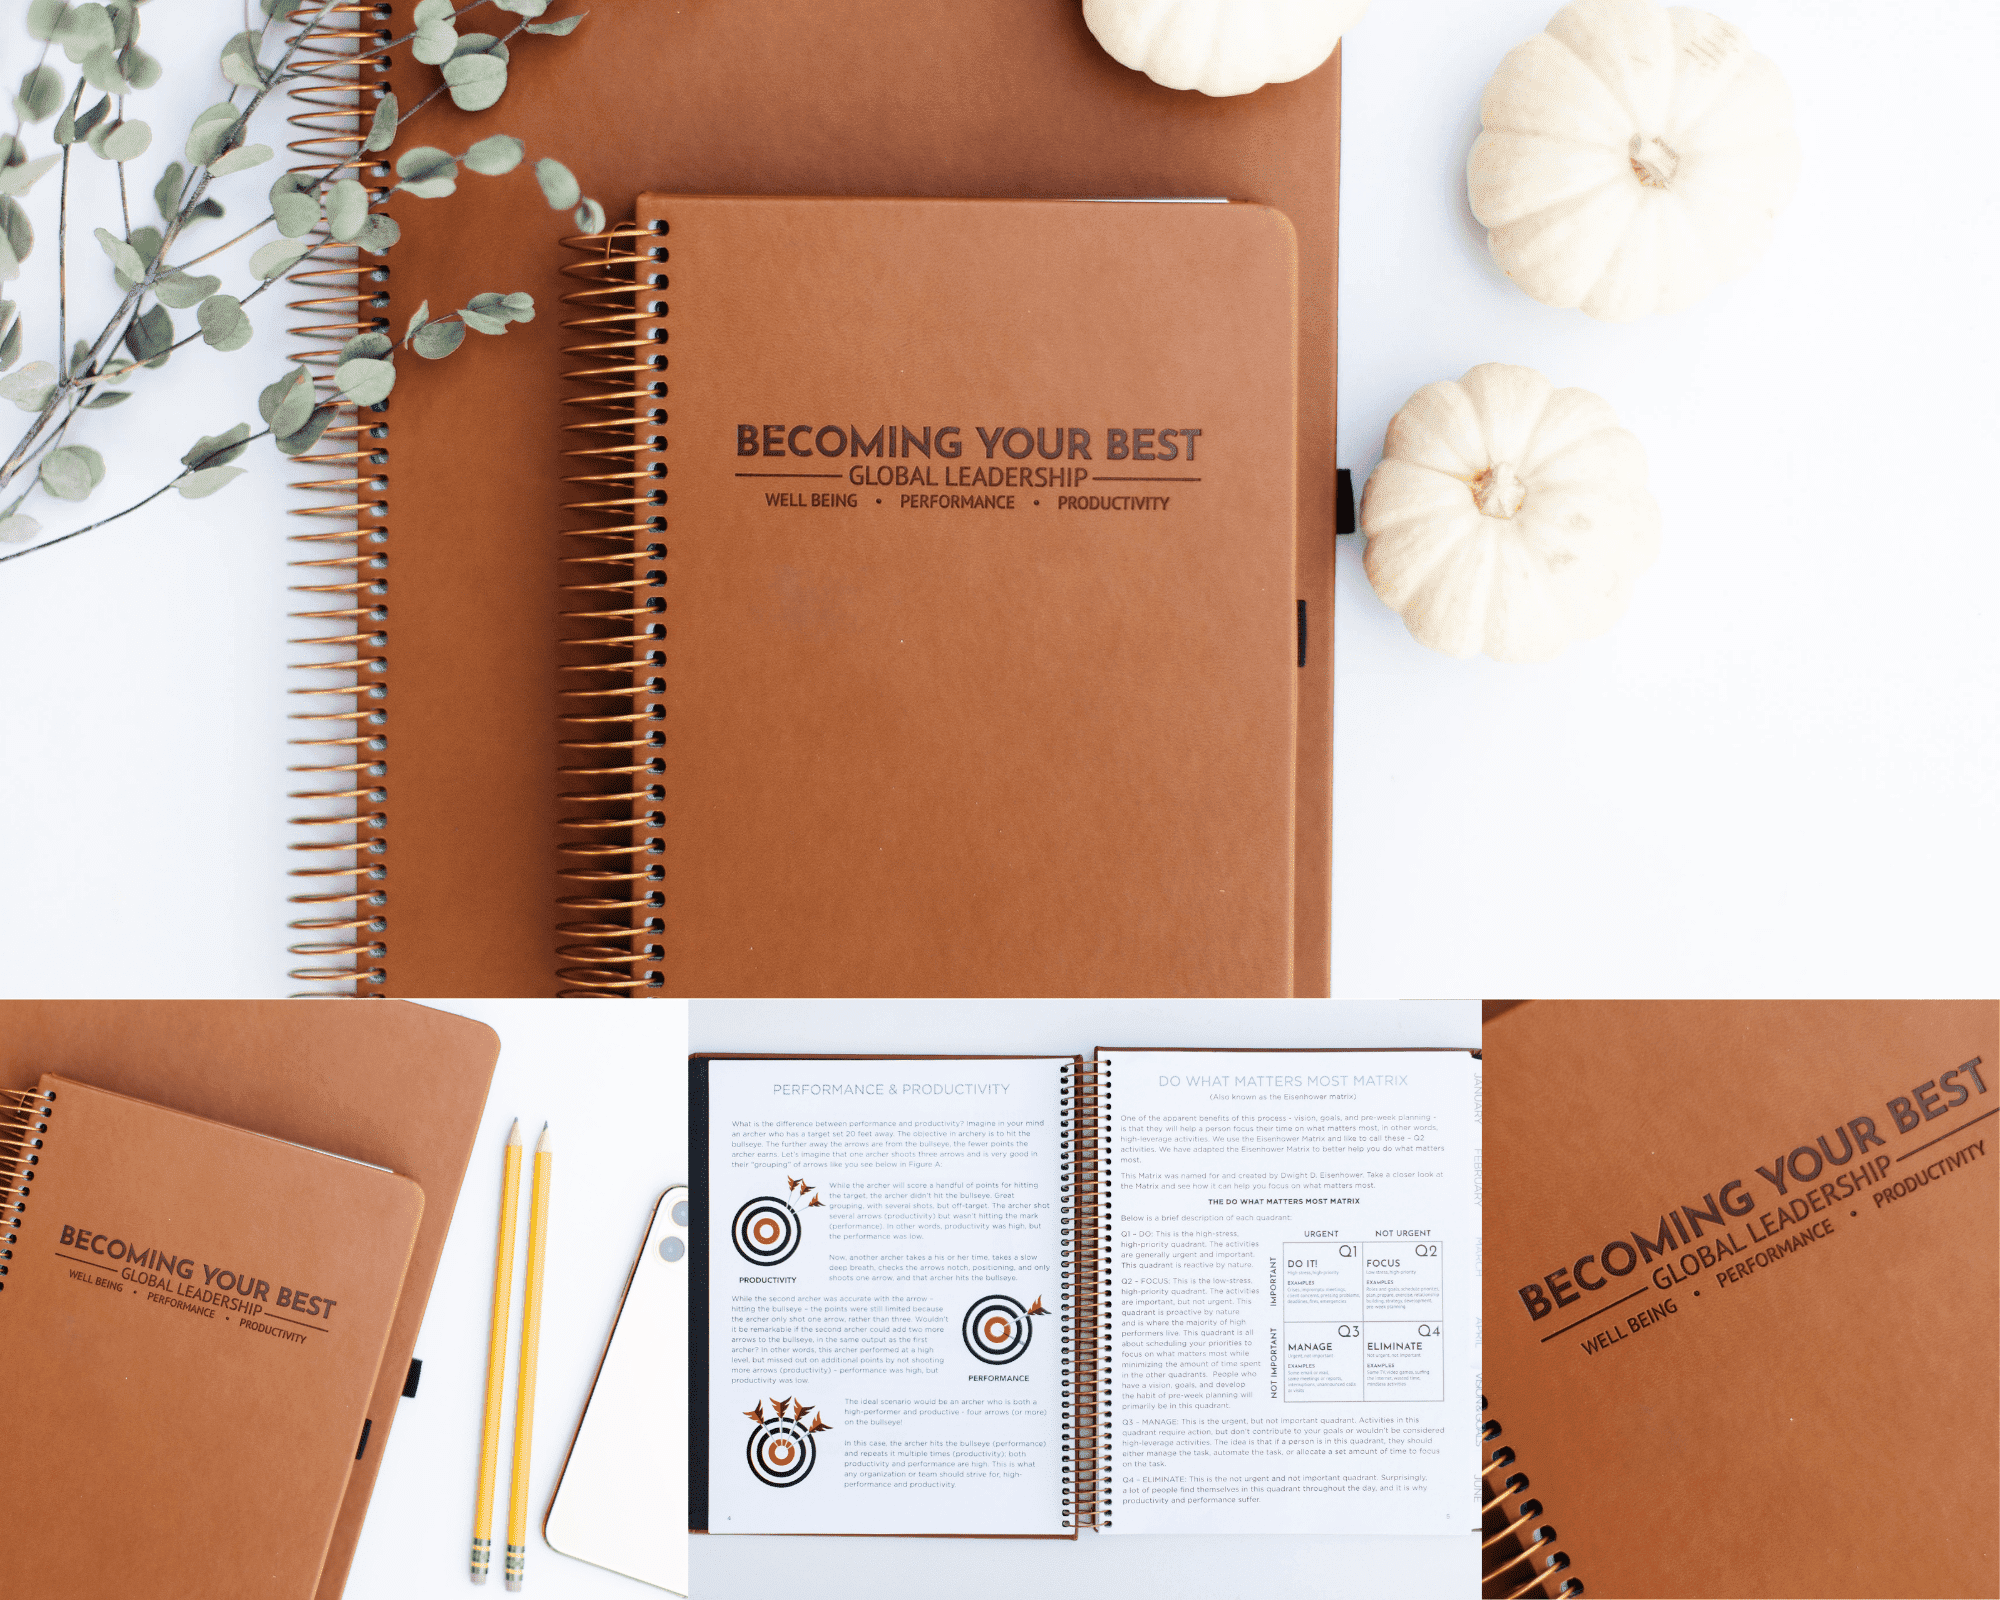 Do What Matters Most Training & Planner Package